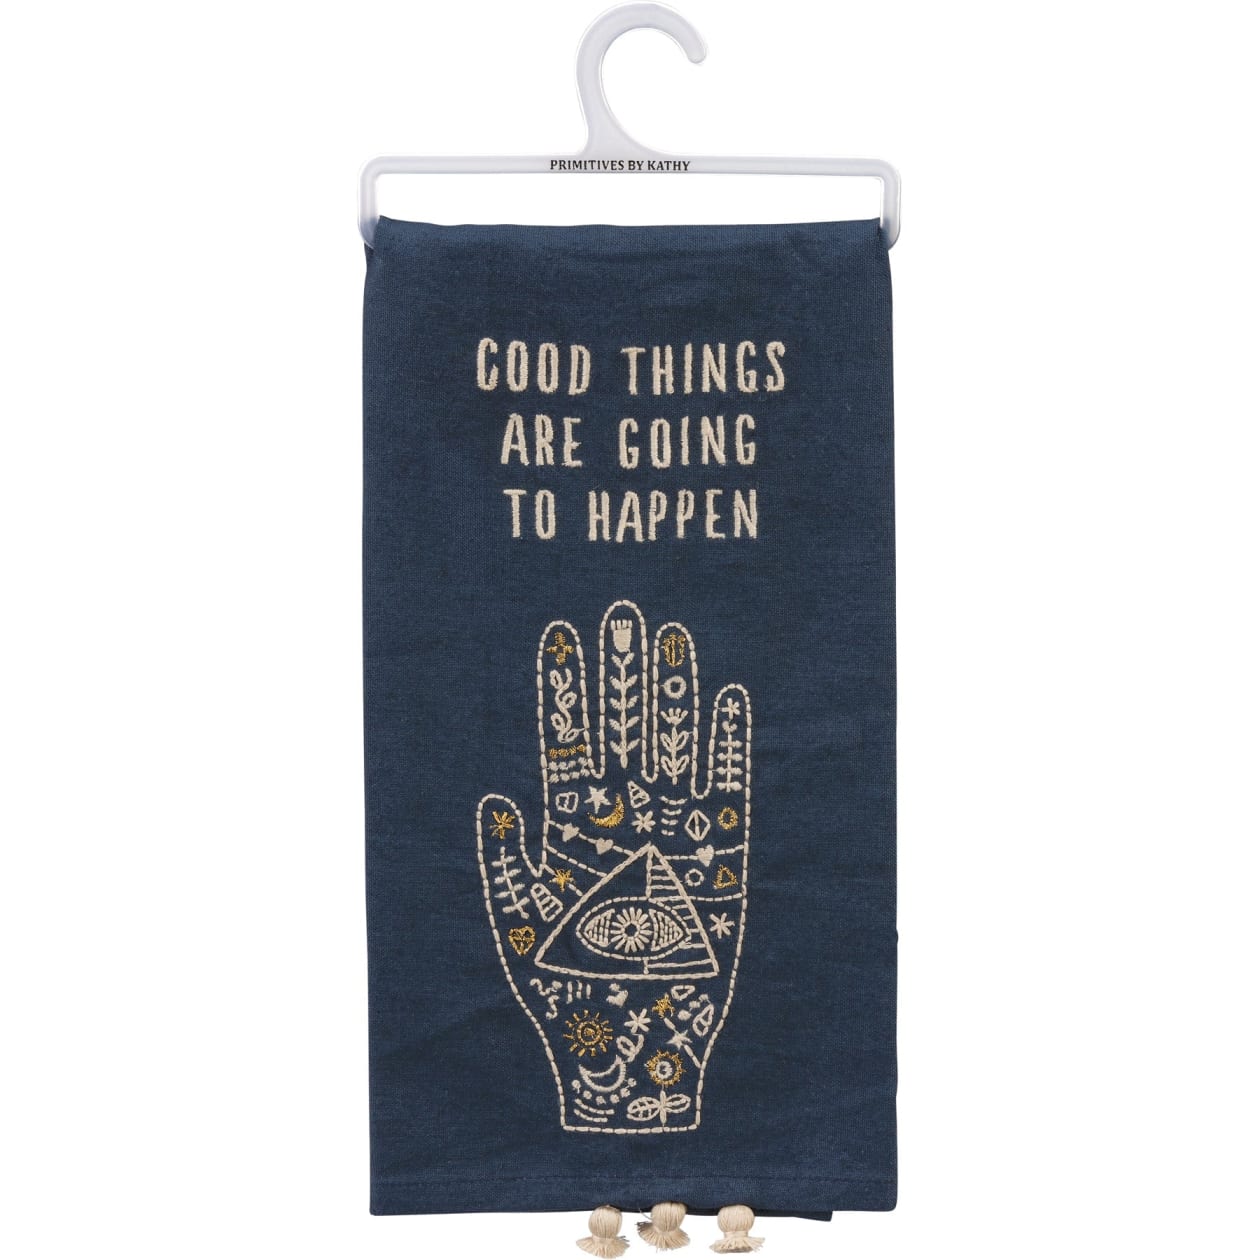 Good Things Are Going To Happen Dish Cloth Towel | Cotton and Linen | Embroidered with Tassels | 20" x 26"